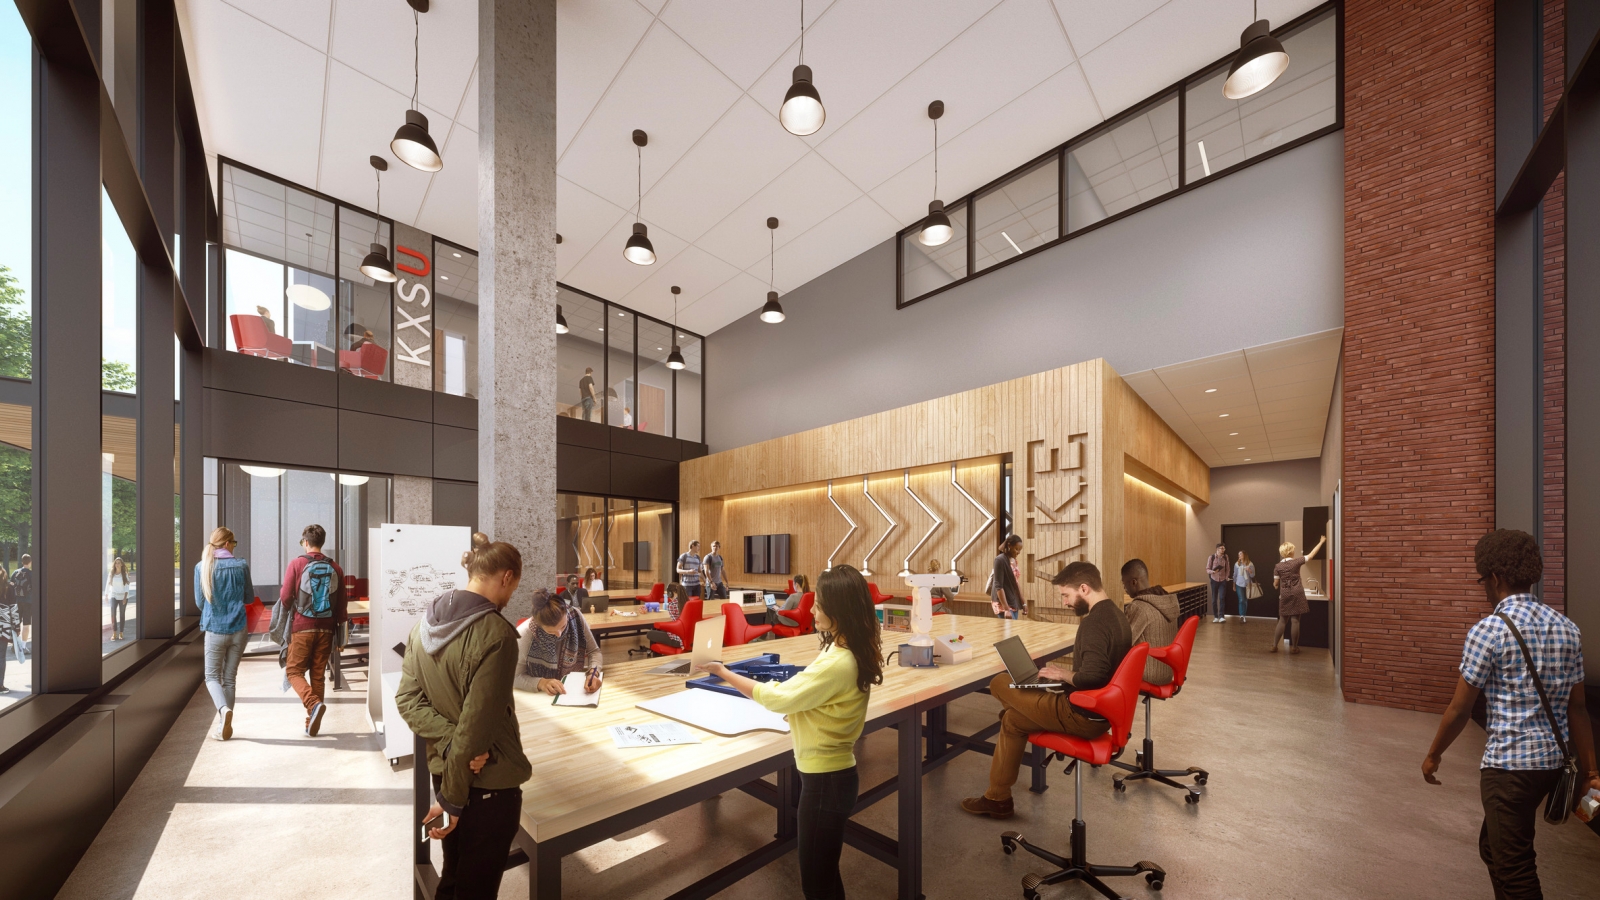 interior rendering of makerspace environment 